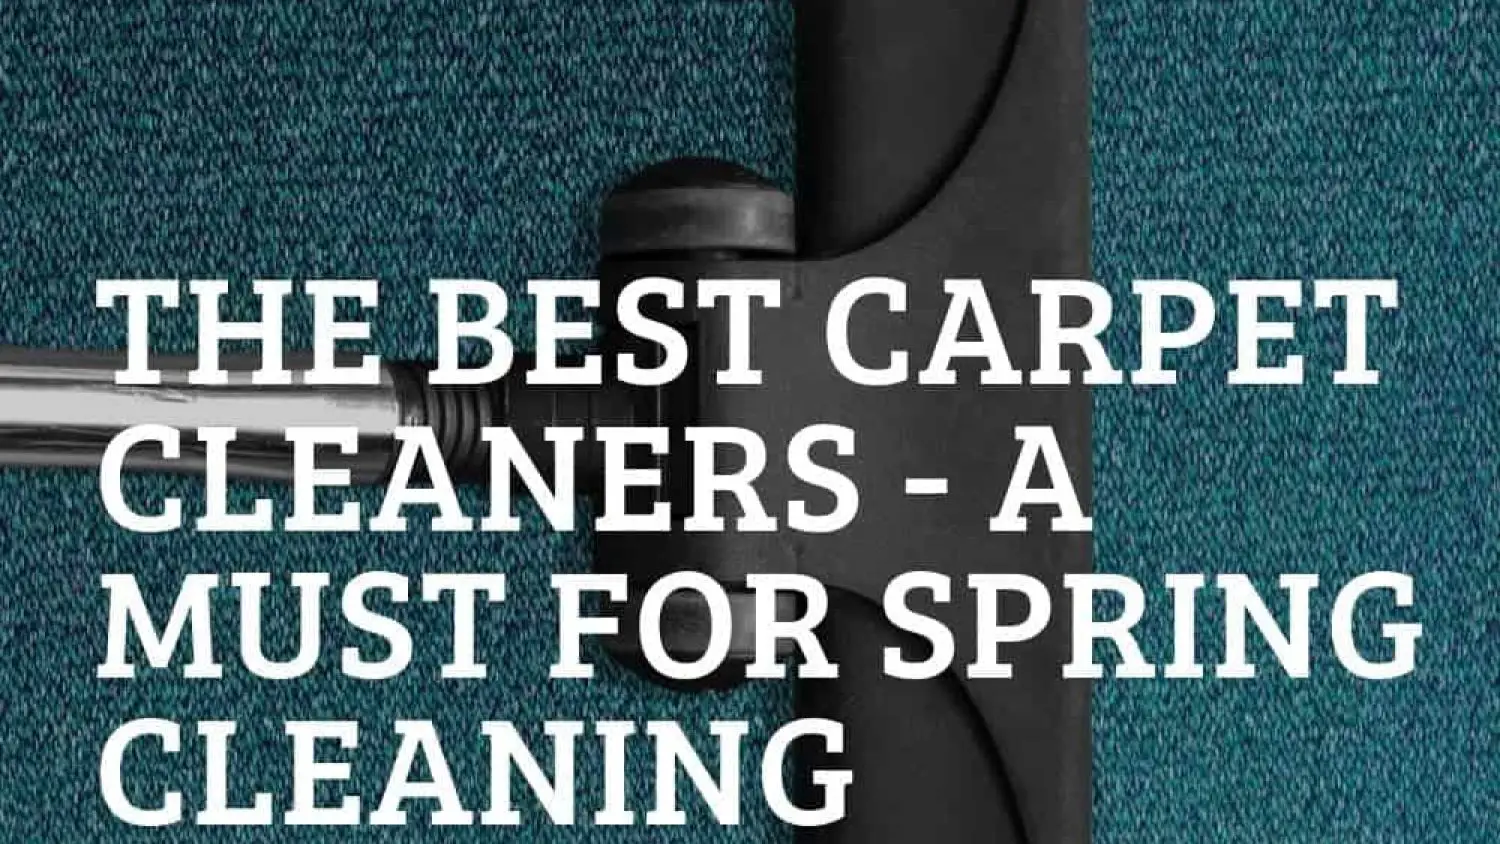 Best Carpet Cleaning Machines: Spring Clean with these Carpet Cleaners!